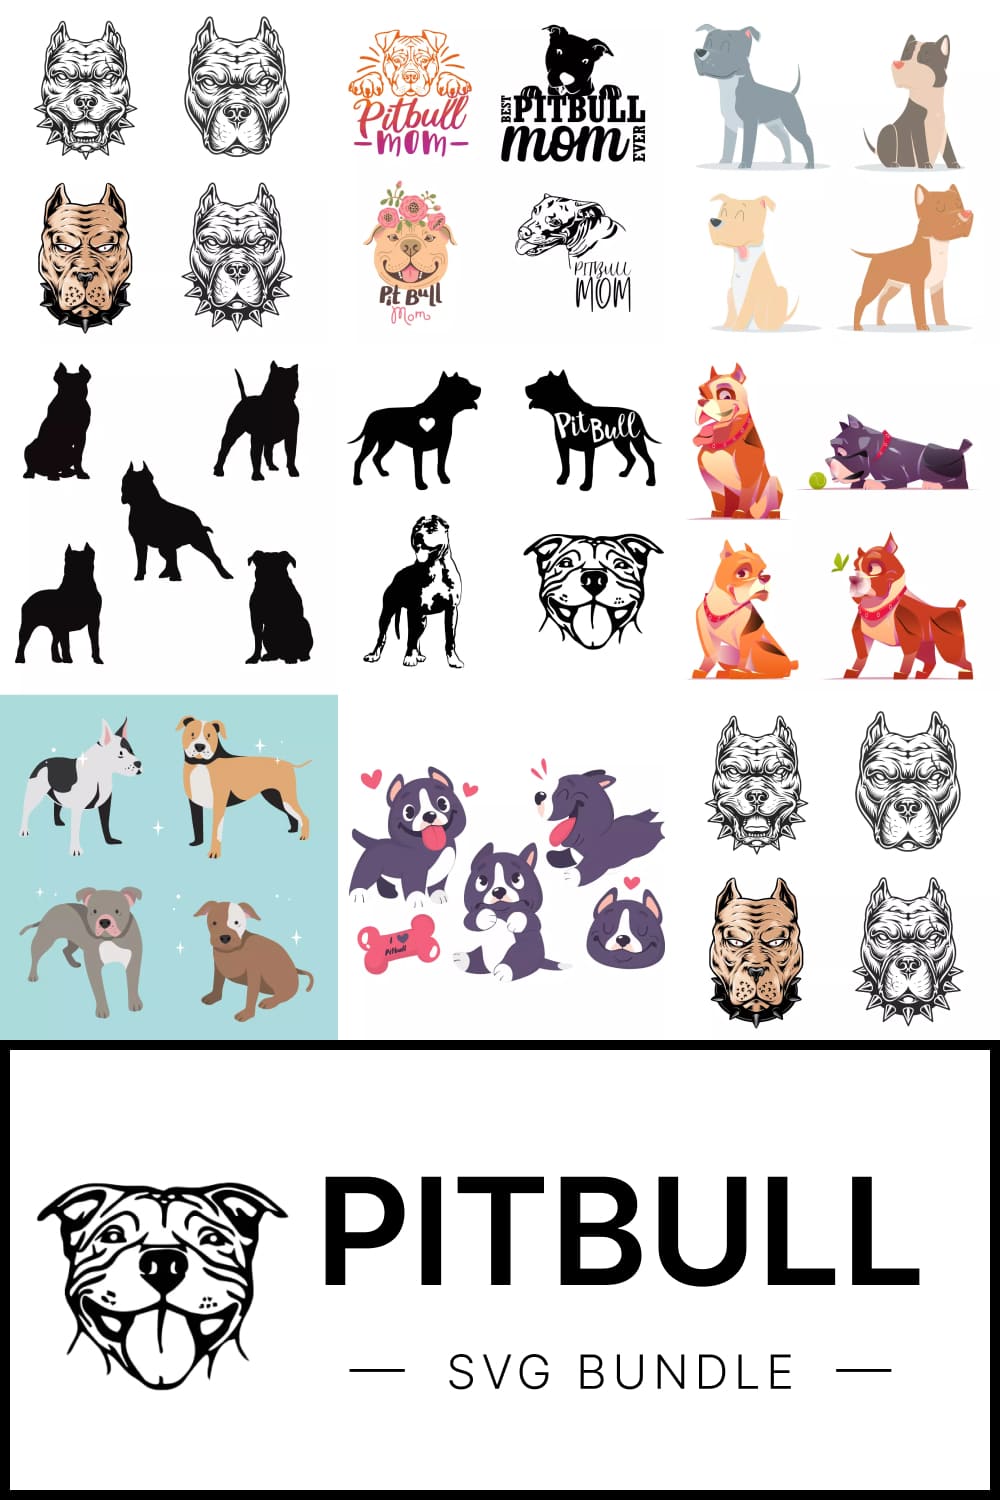 The pitbull svg bundle includes a variety of pitbull silhouettes.